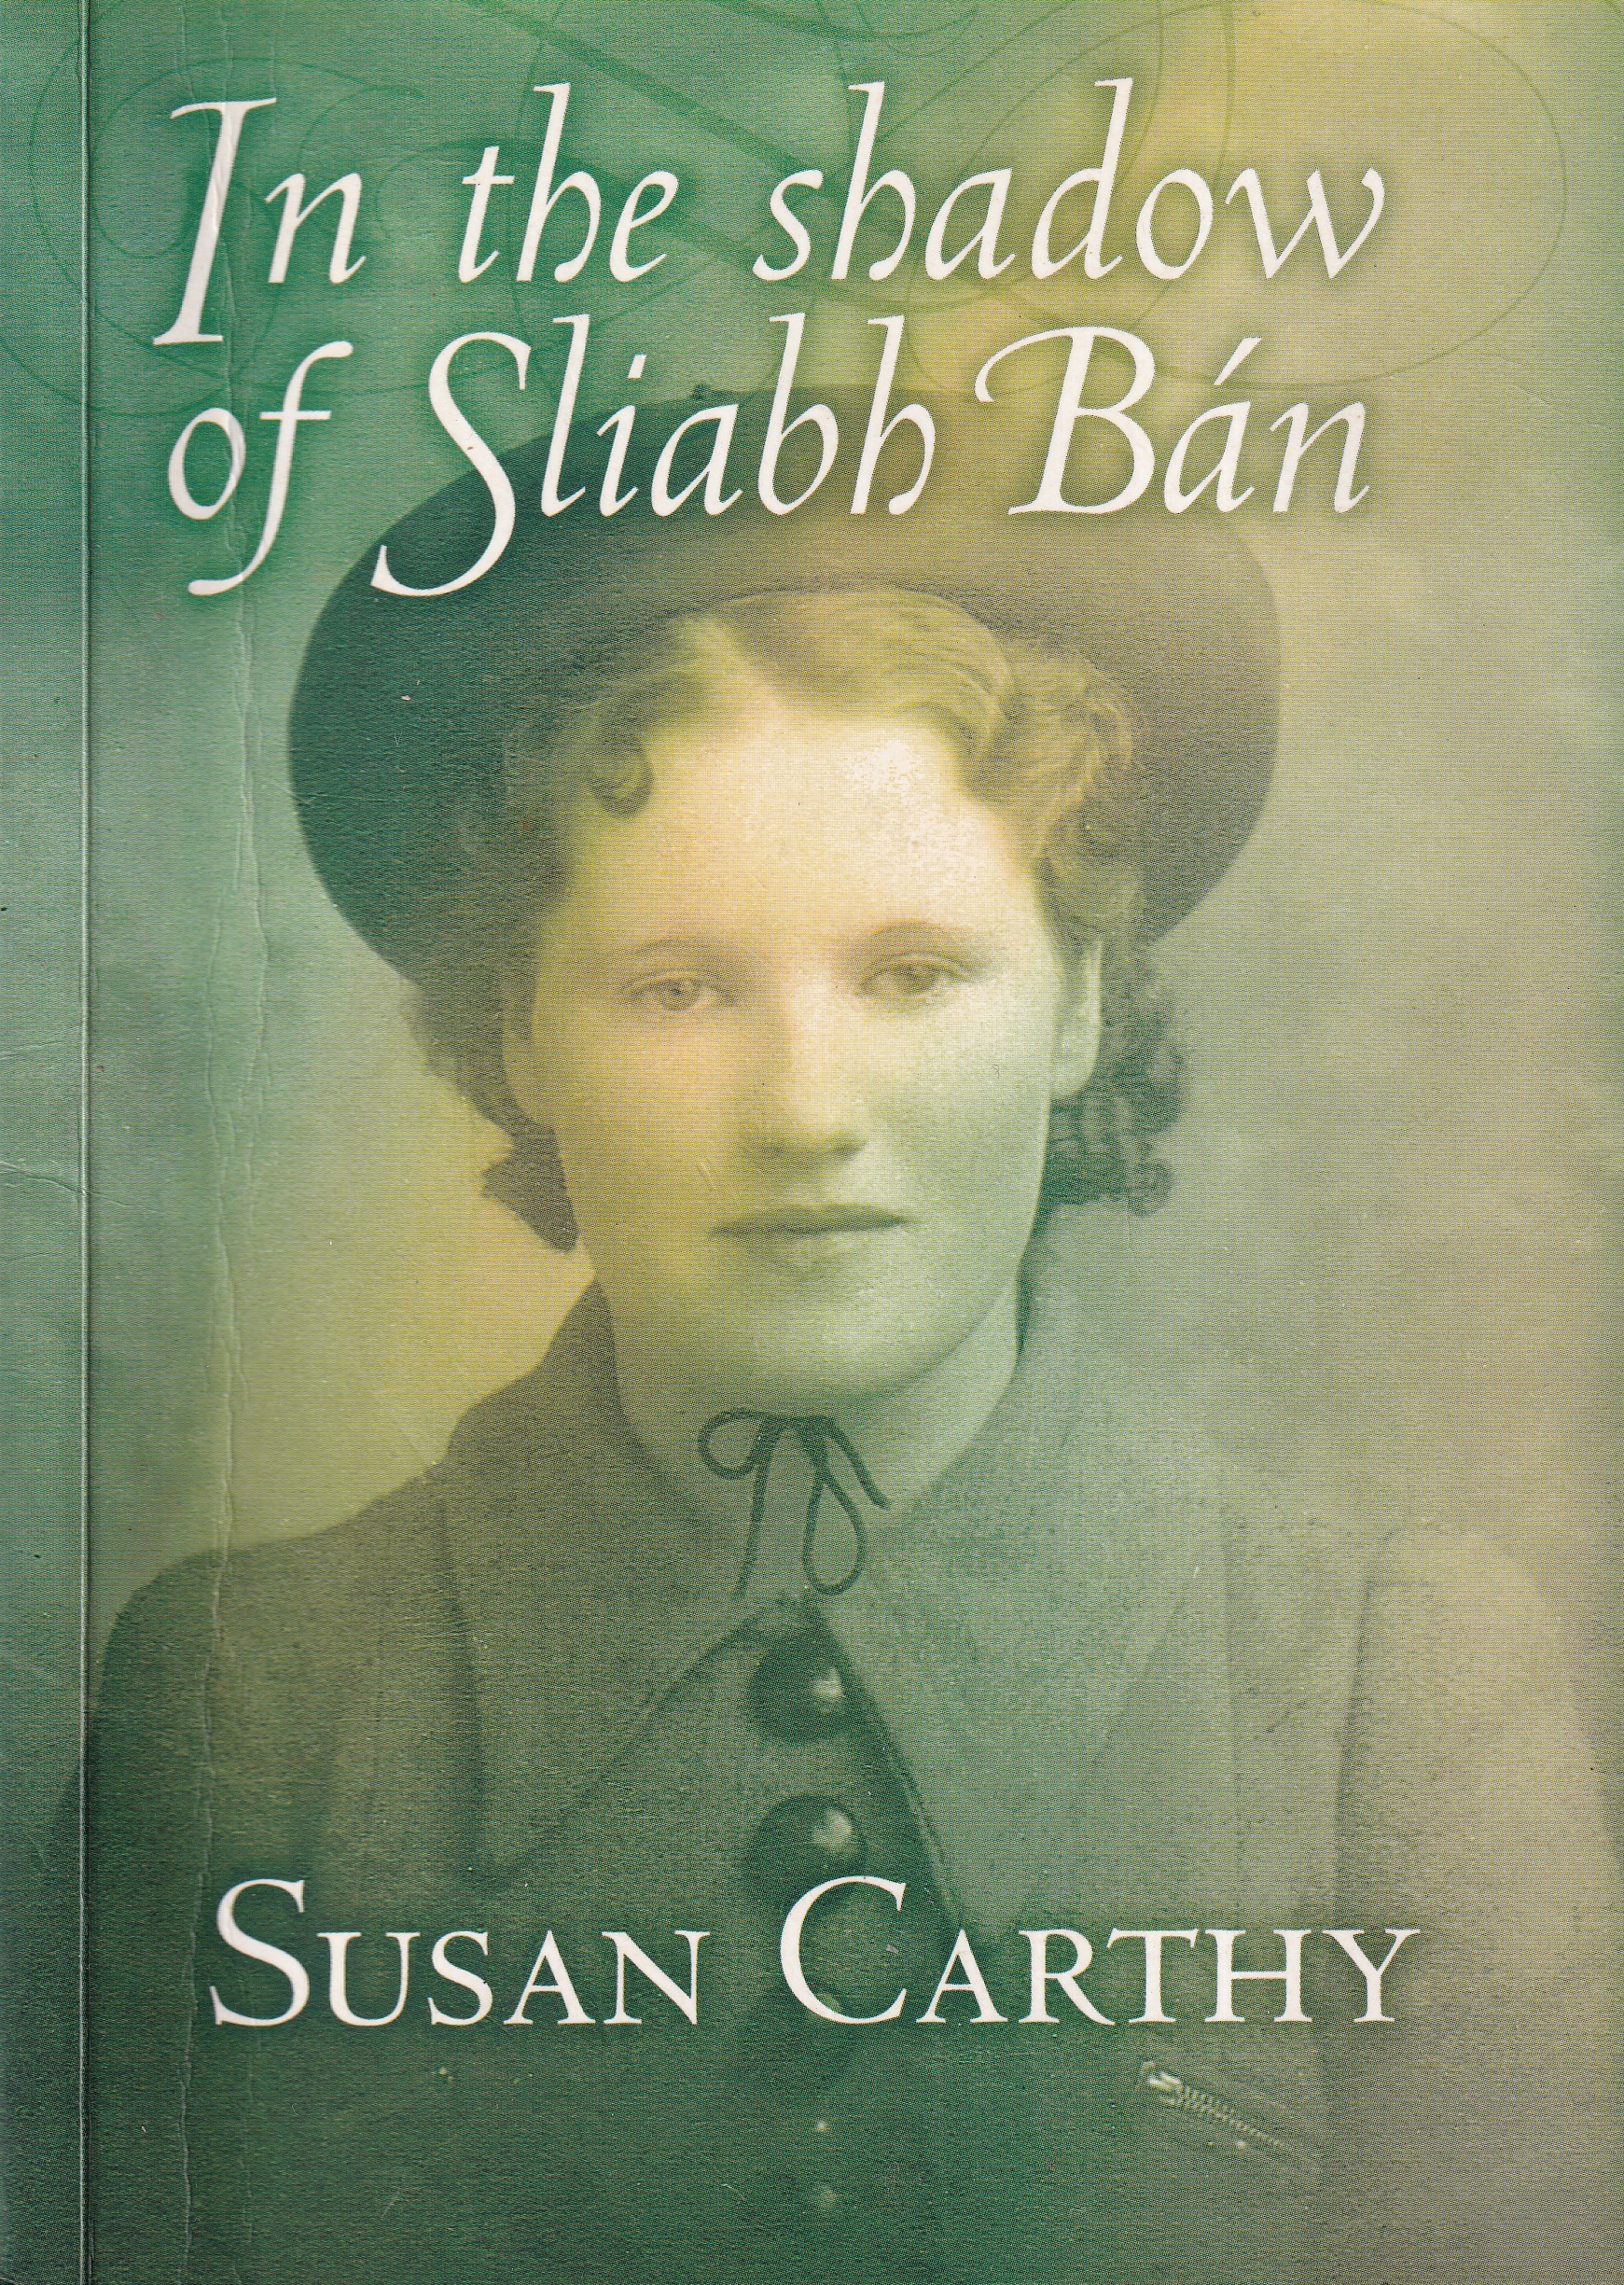 In the Shadow of Sliabh Bán by Susan Carthy